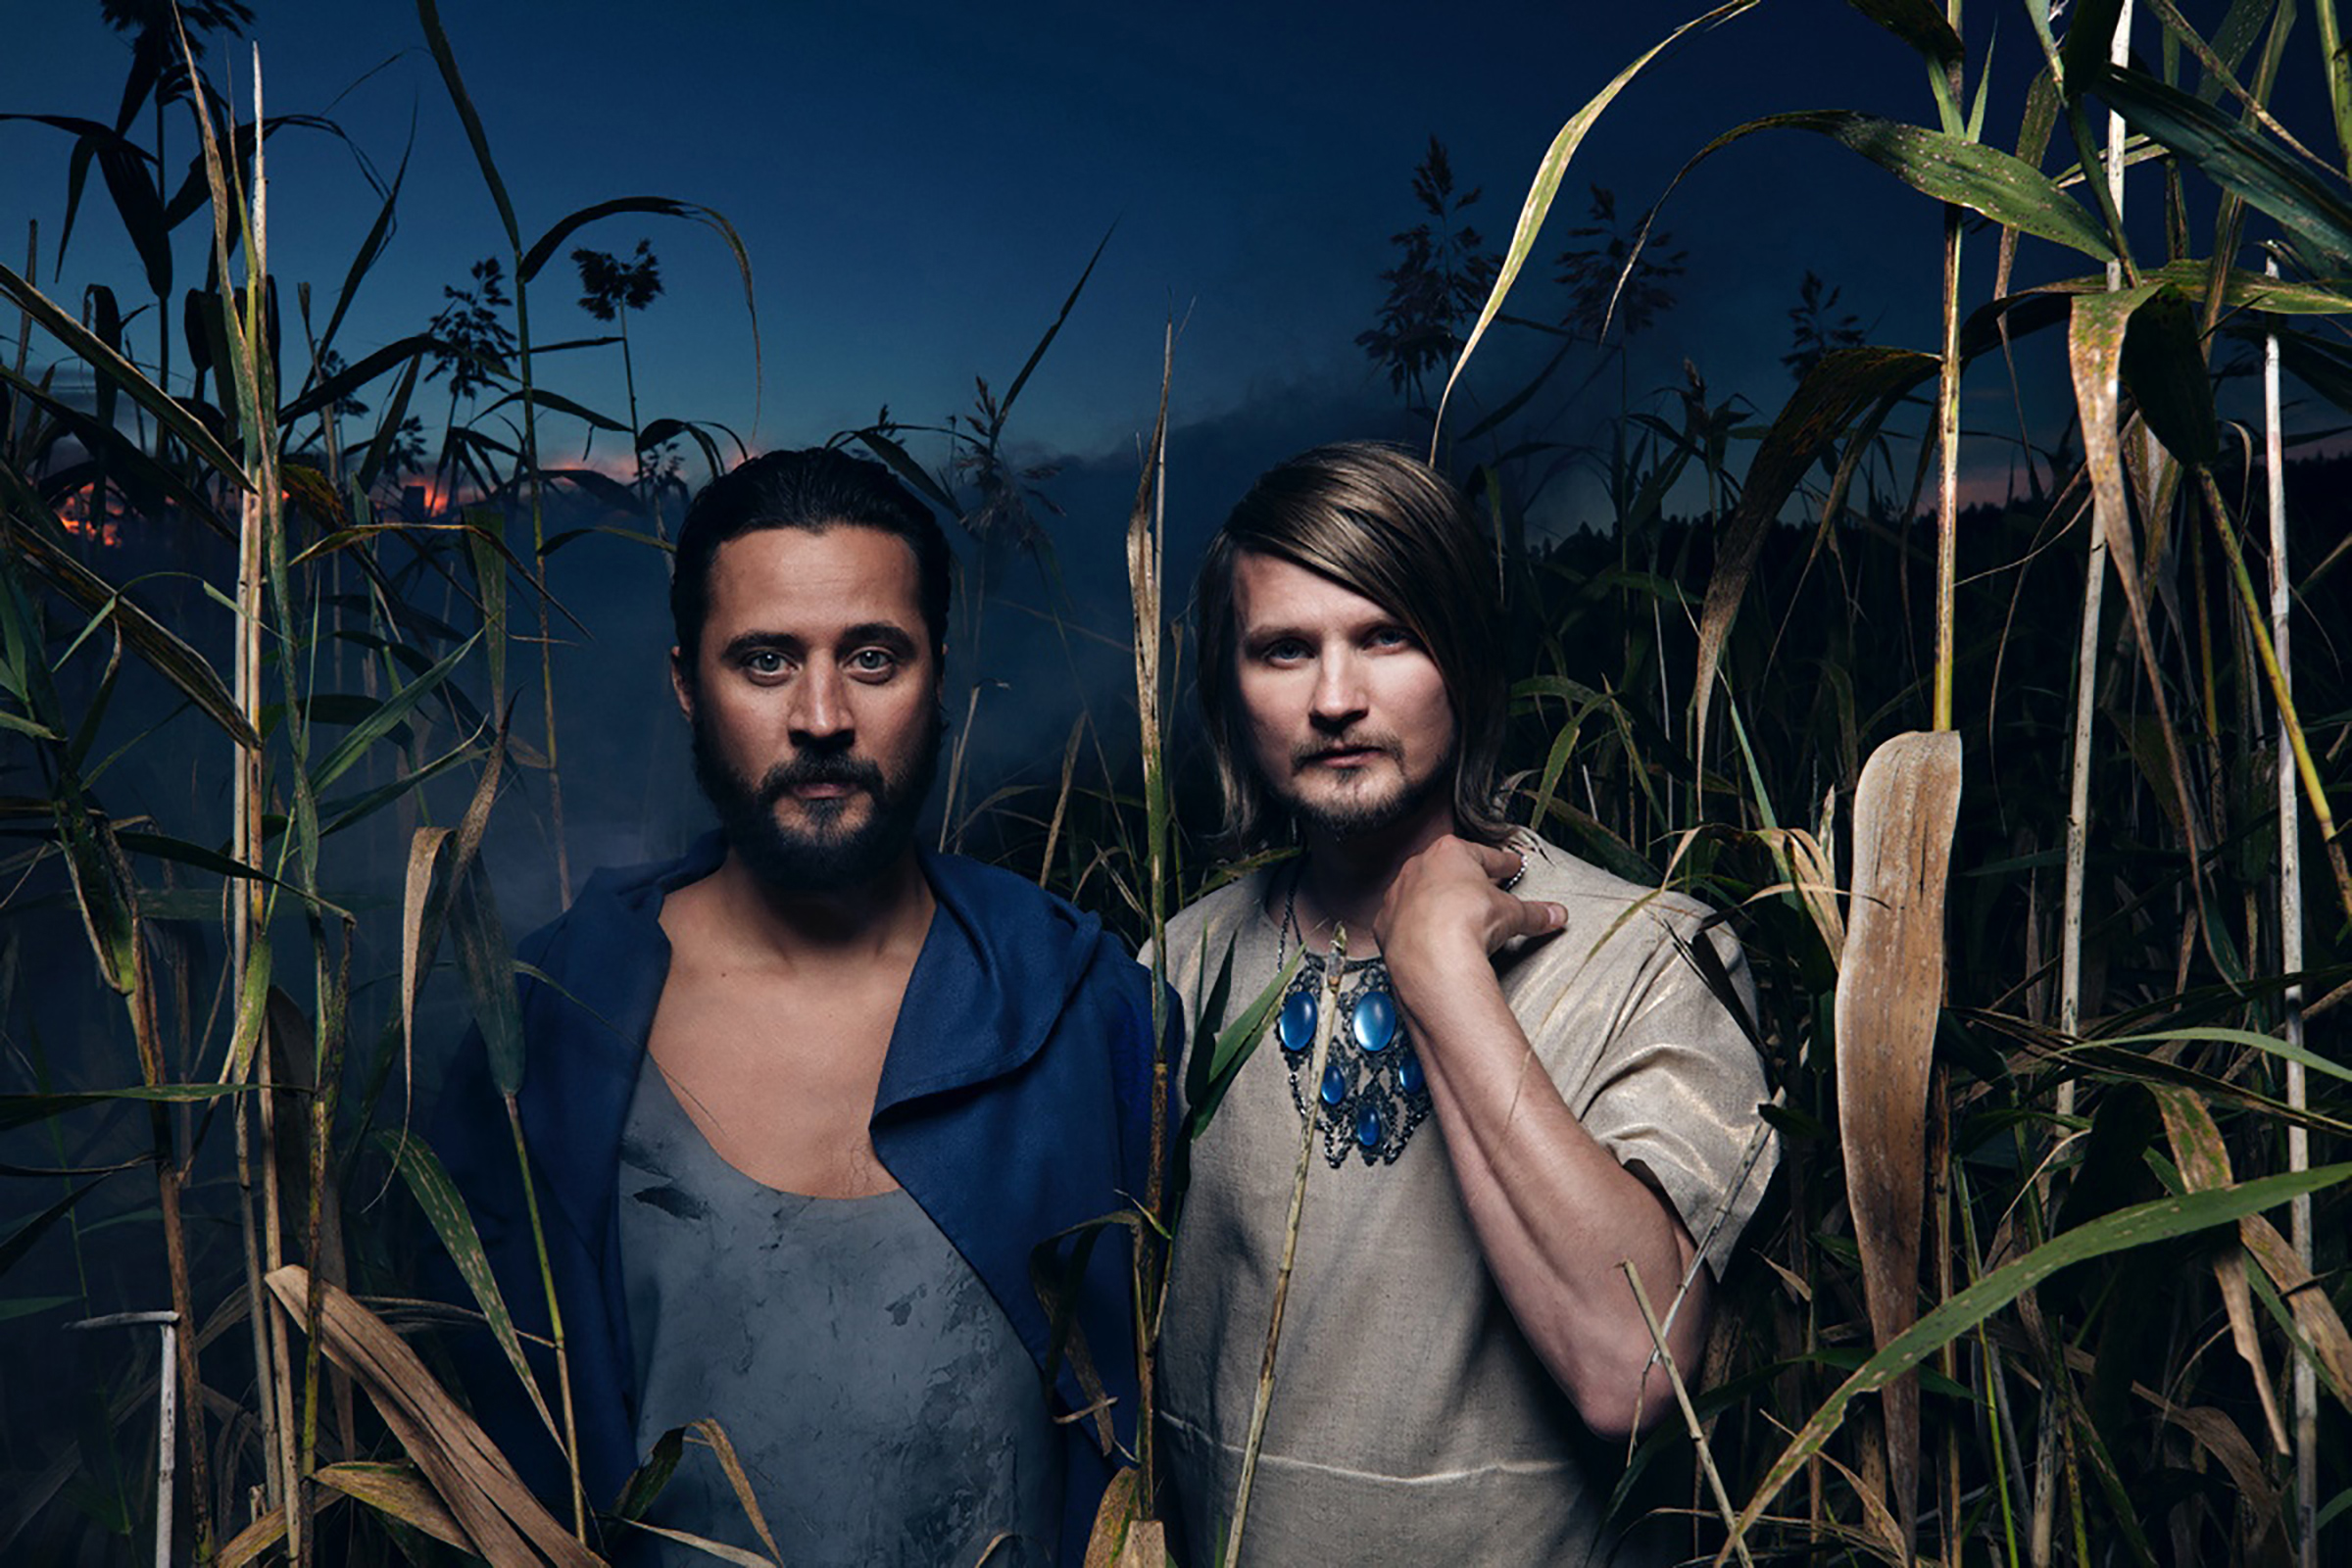 [PREMIERE] Röyksopp – I Had This Thing (André Bratten Remix)